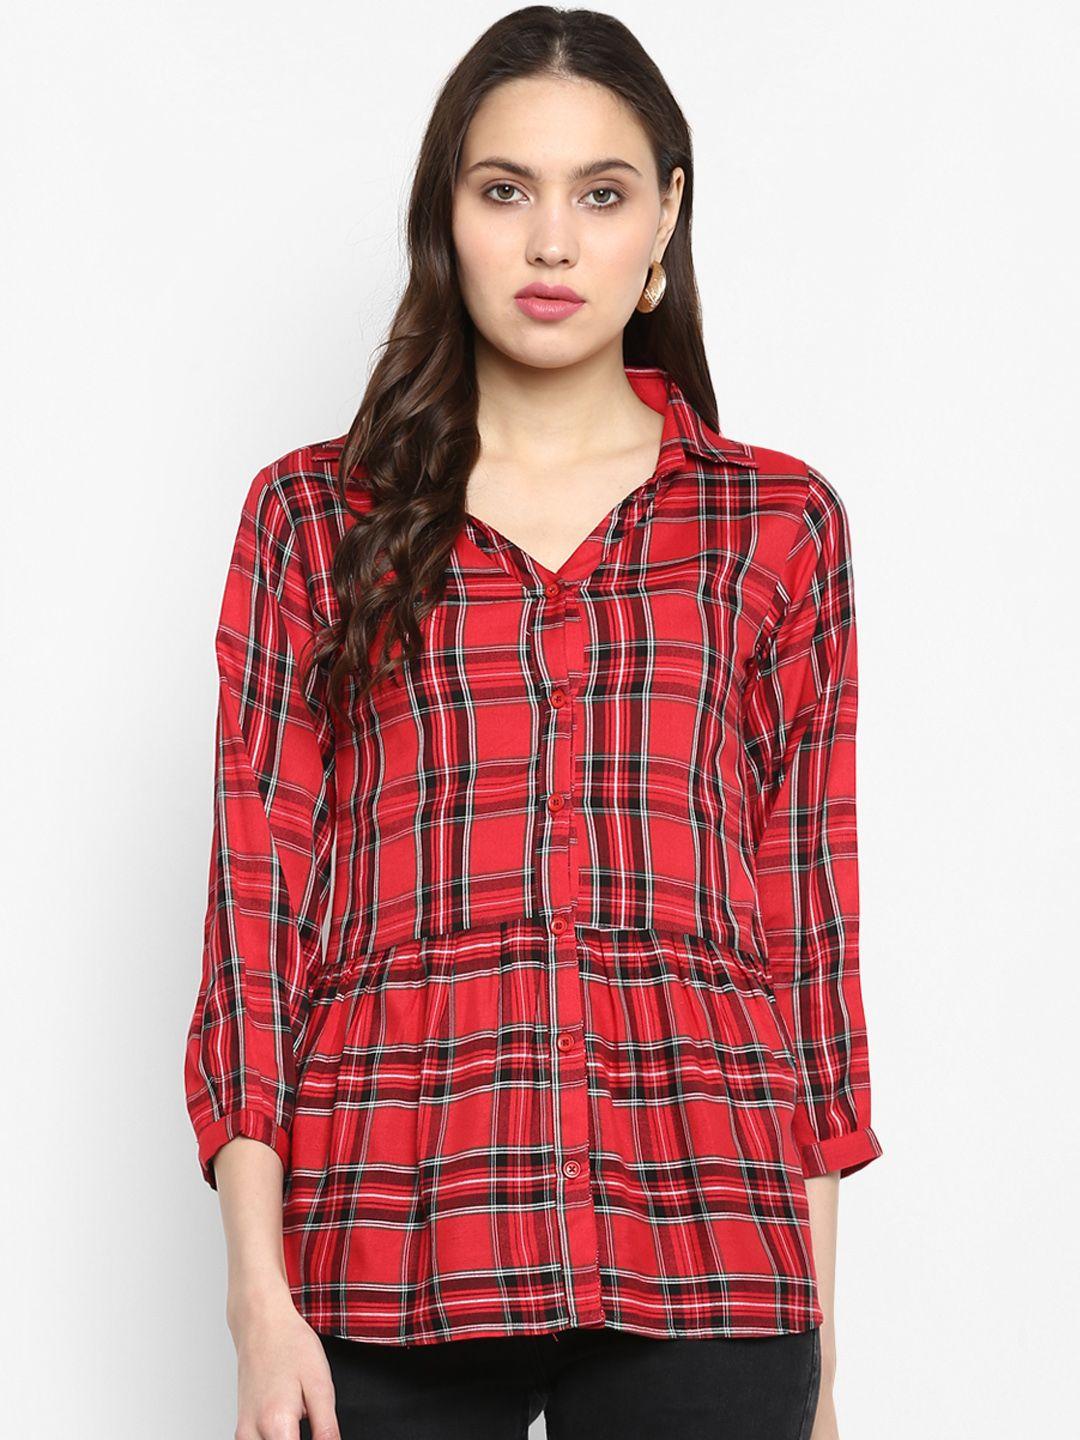 one-femme-women-red-checked-pure-cotton-shirt-style-pure-cotton-top